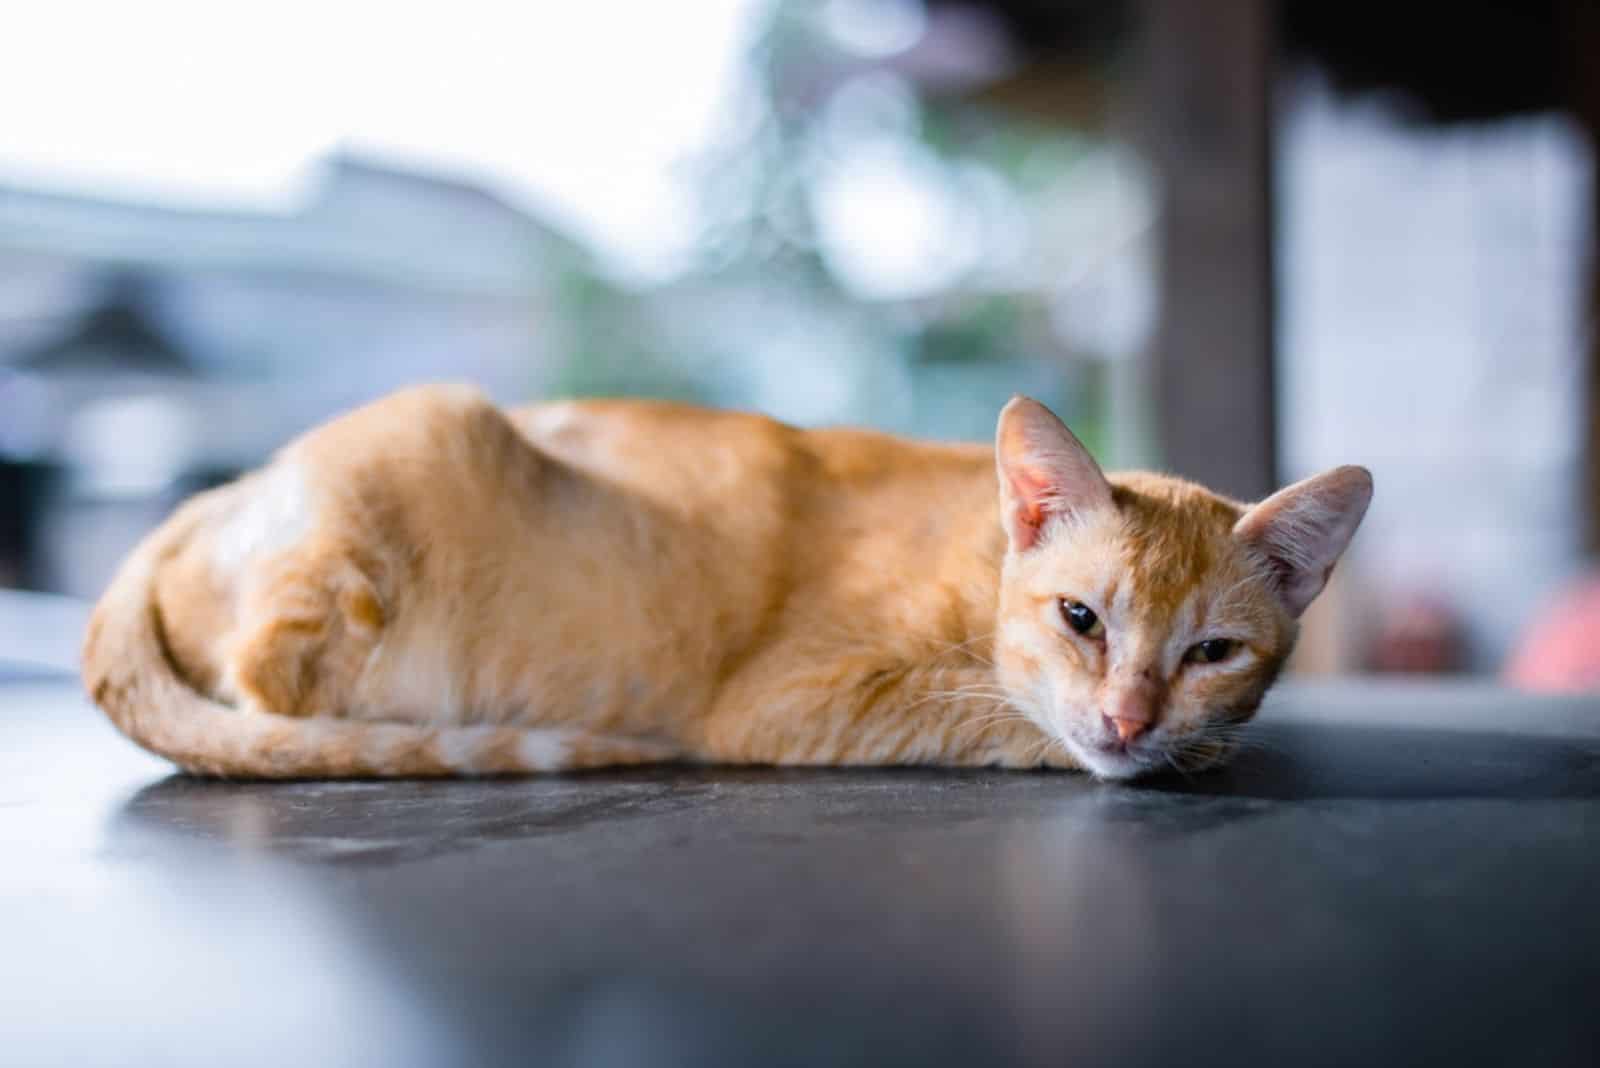 A yellow An orange cat looks skinny from hunger